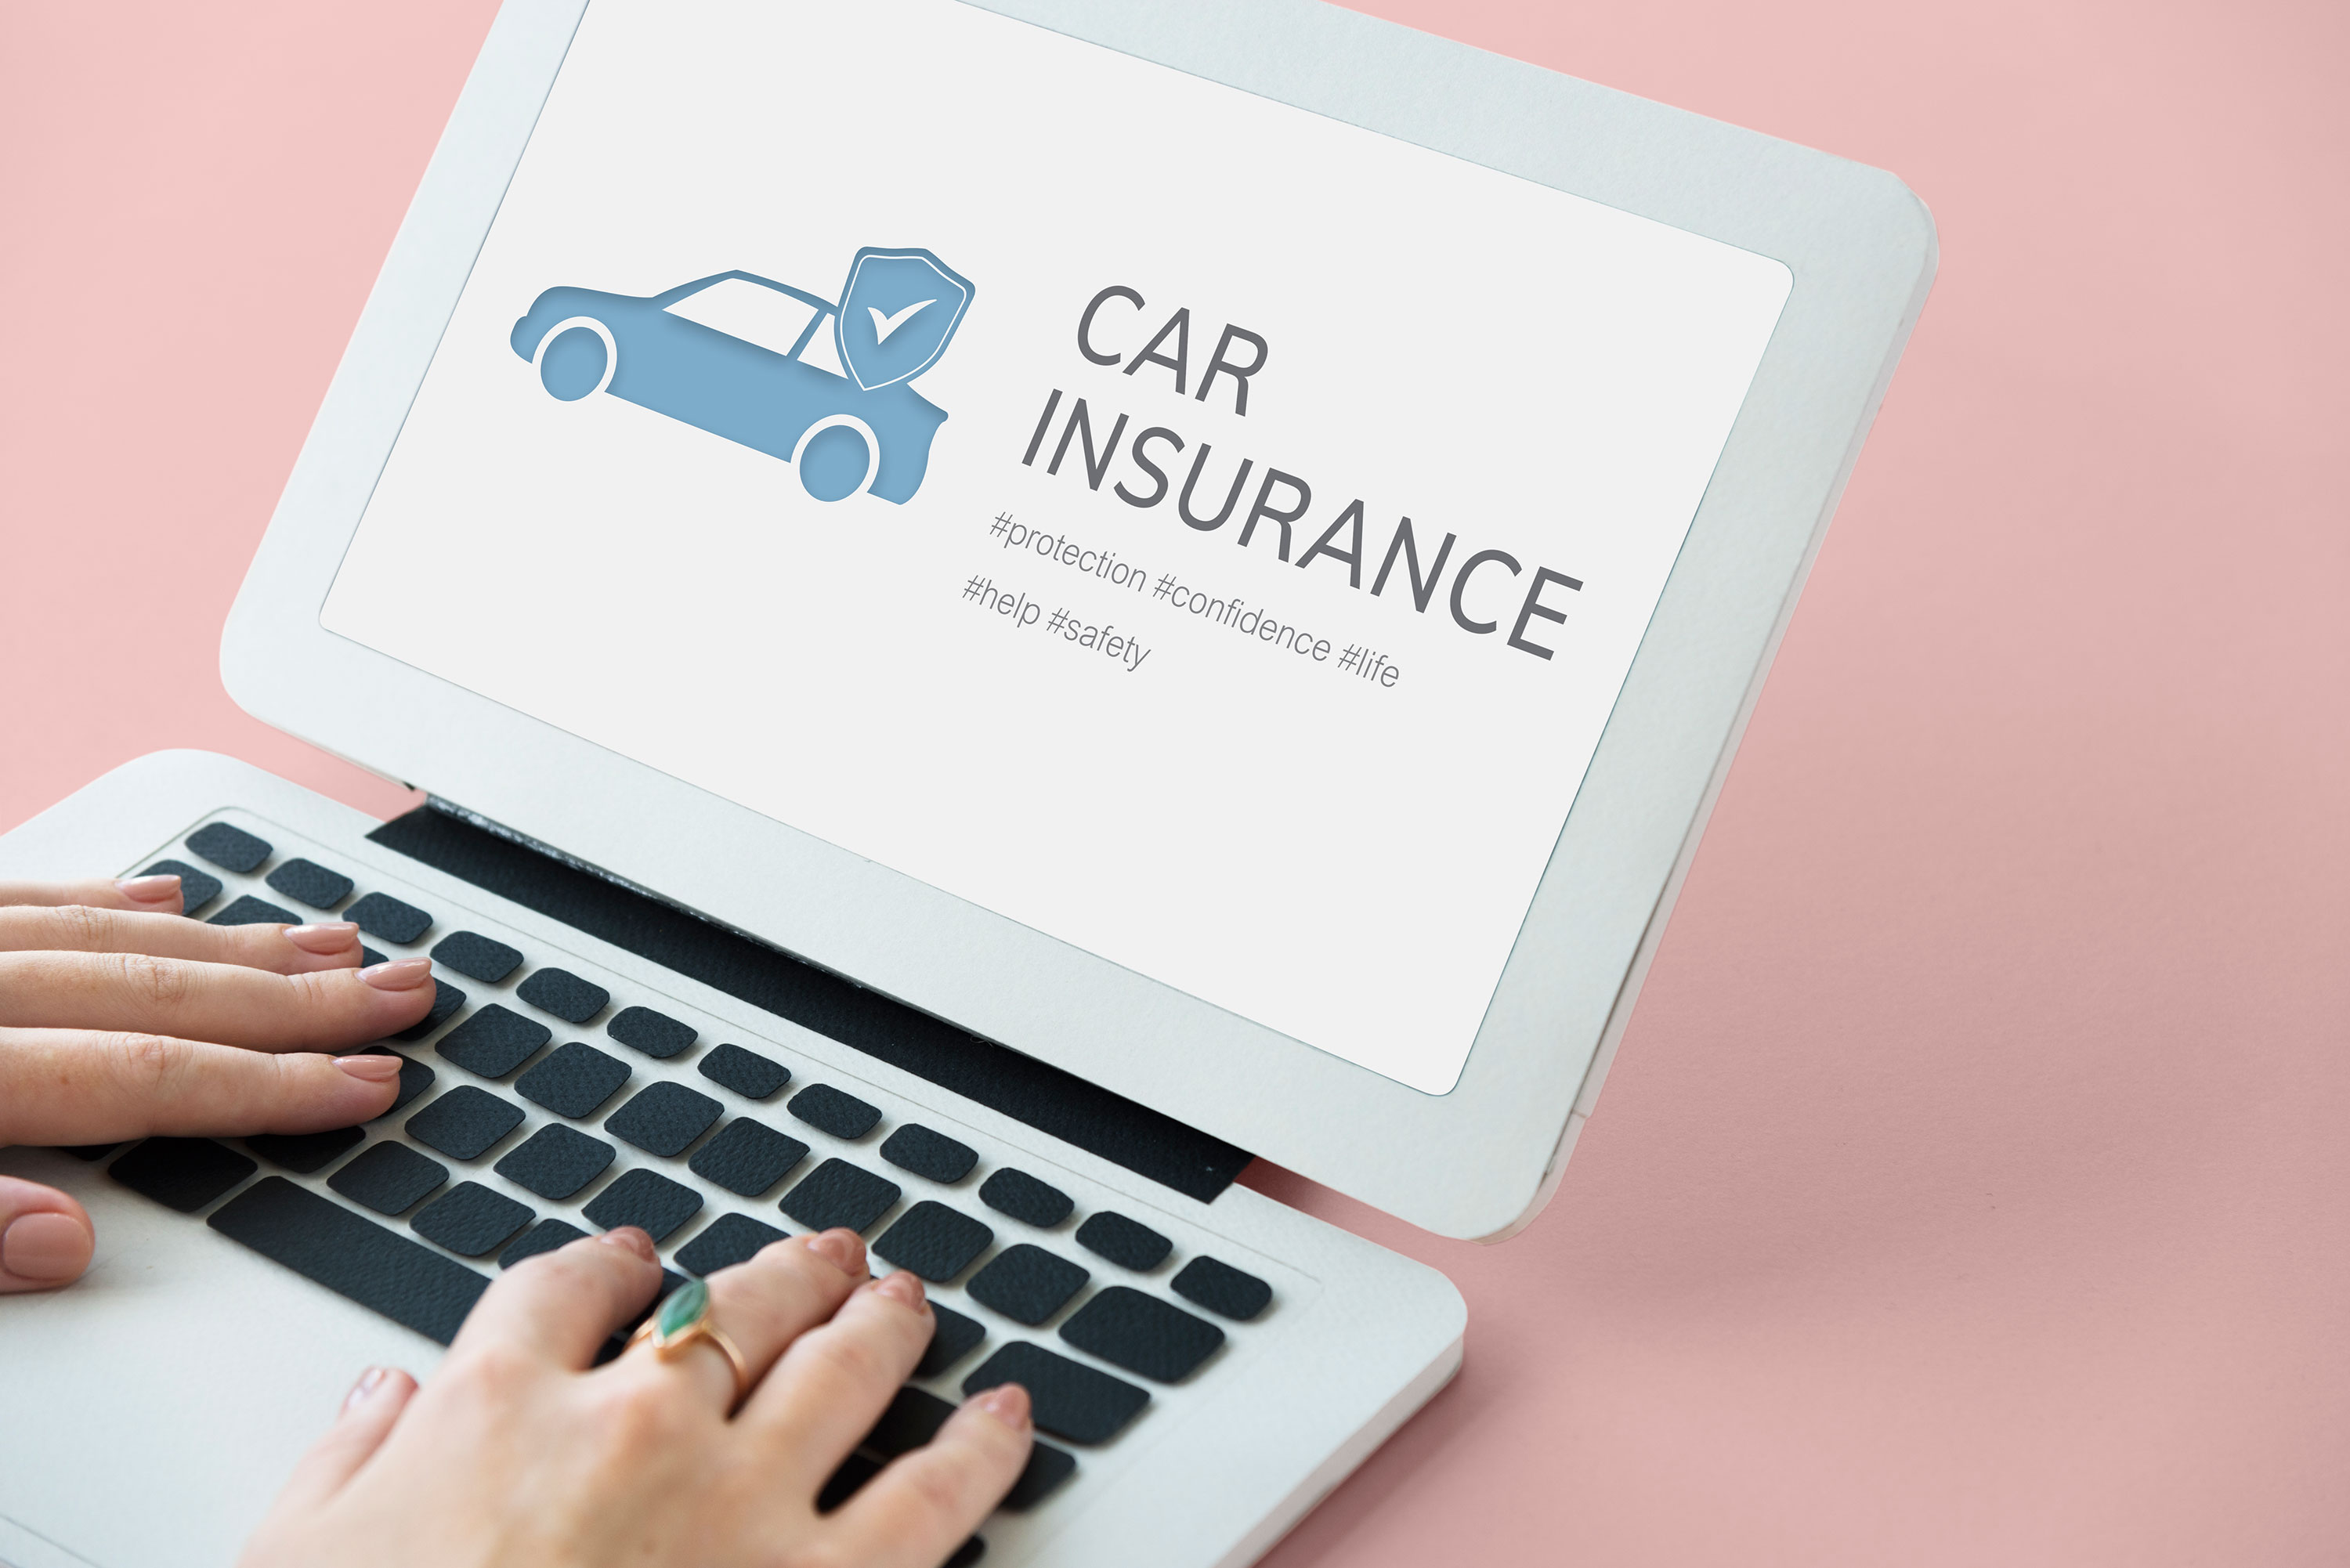 How to Find My Car Insurance Policy Number?